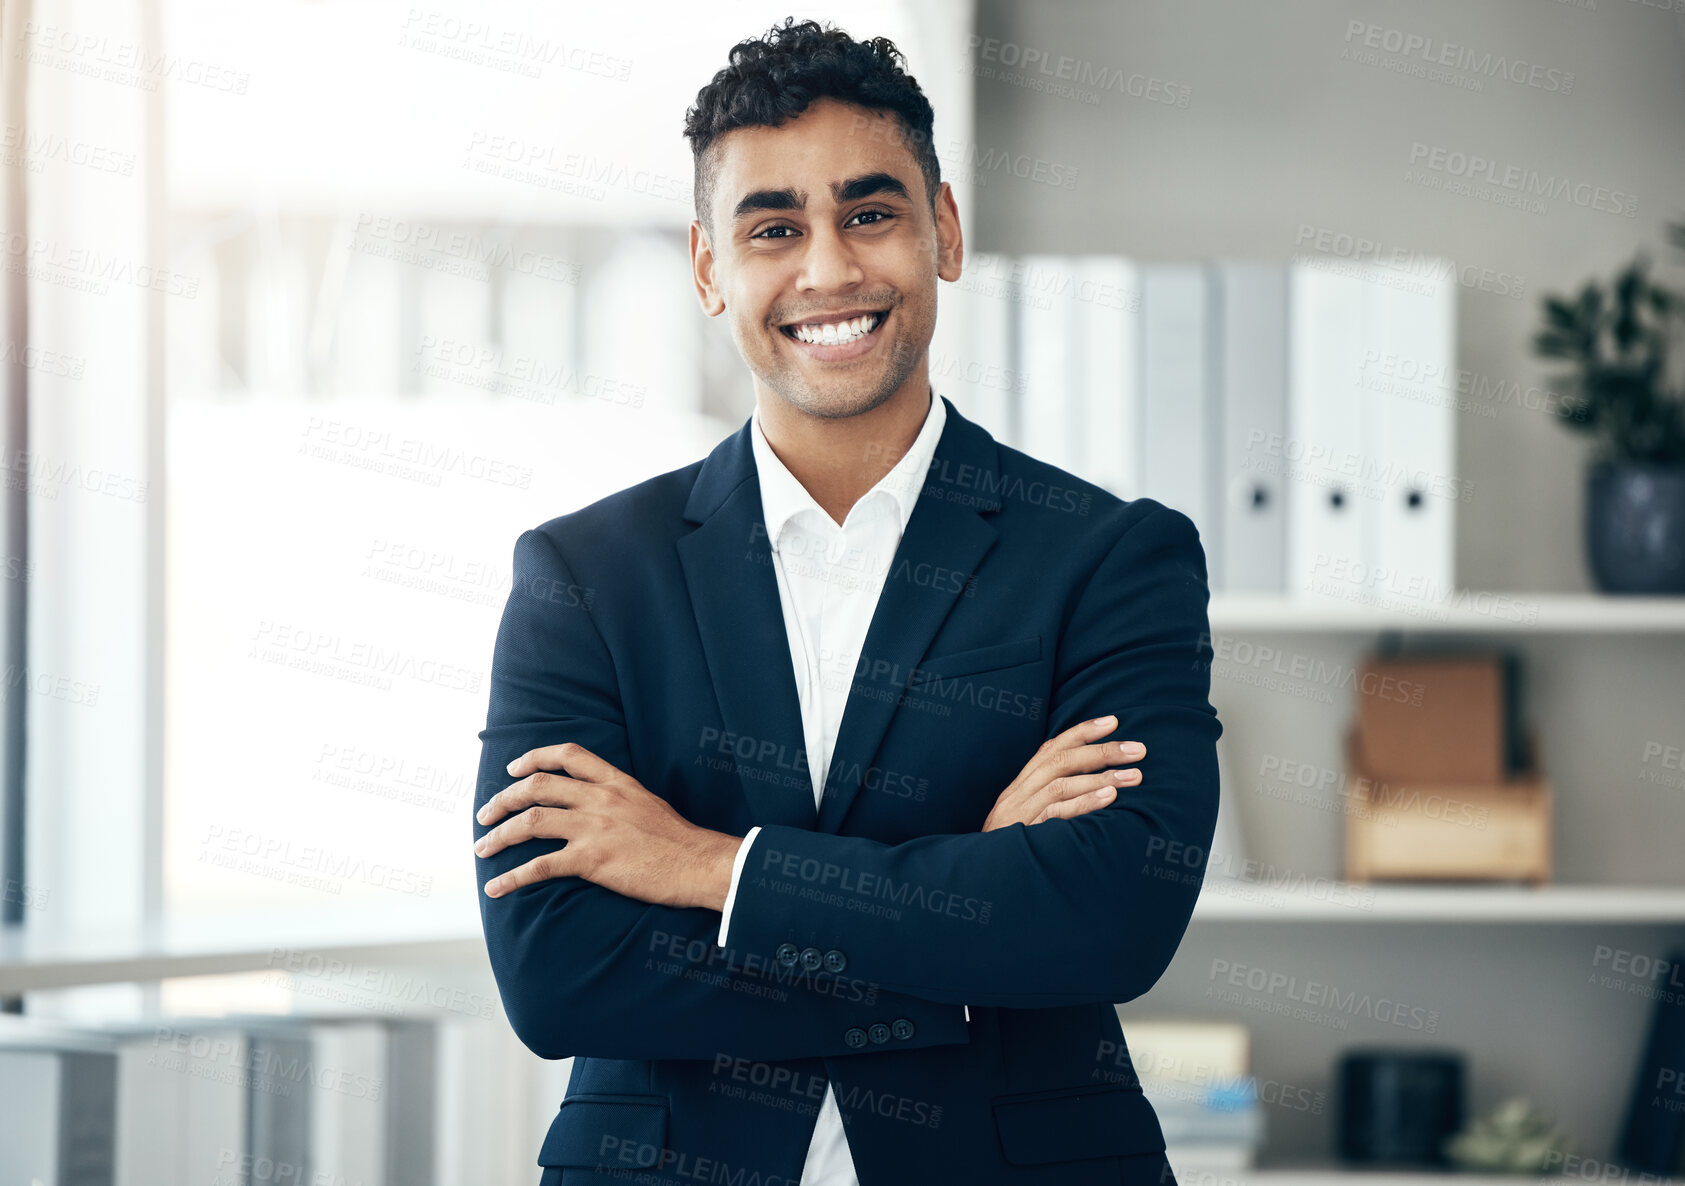 Buy stock photo Office, finance and proud business man in company portrait for job motivation, career goals and leadership with a smile. Corporate manager, boss or executive happy with workplace vision or success